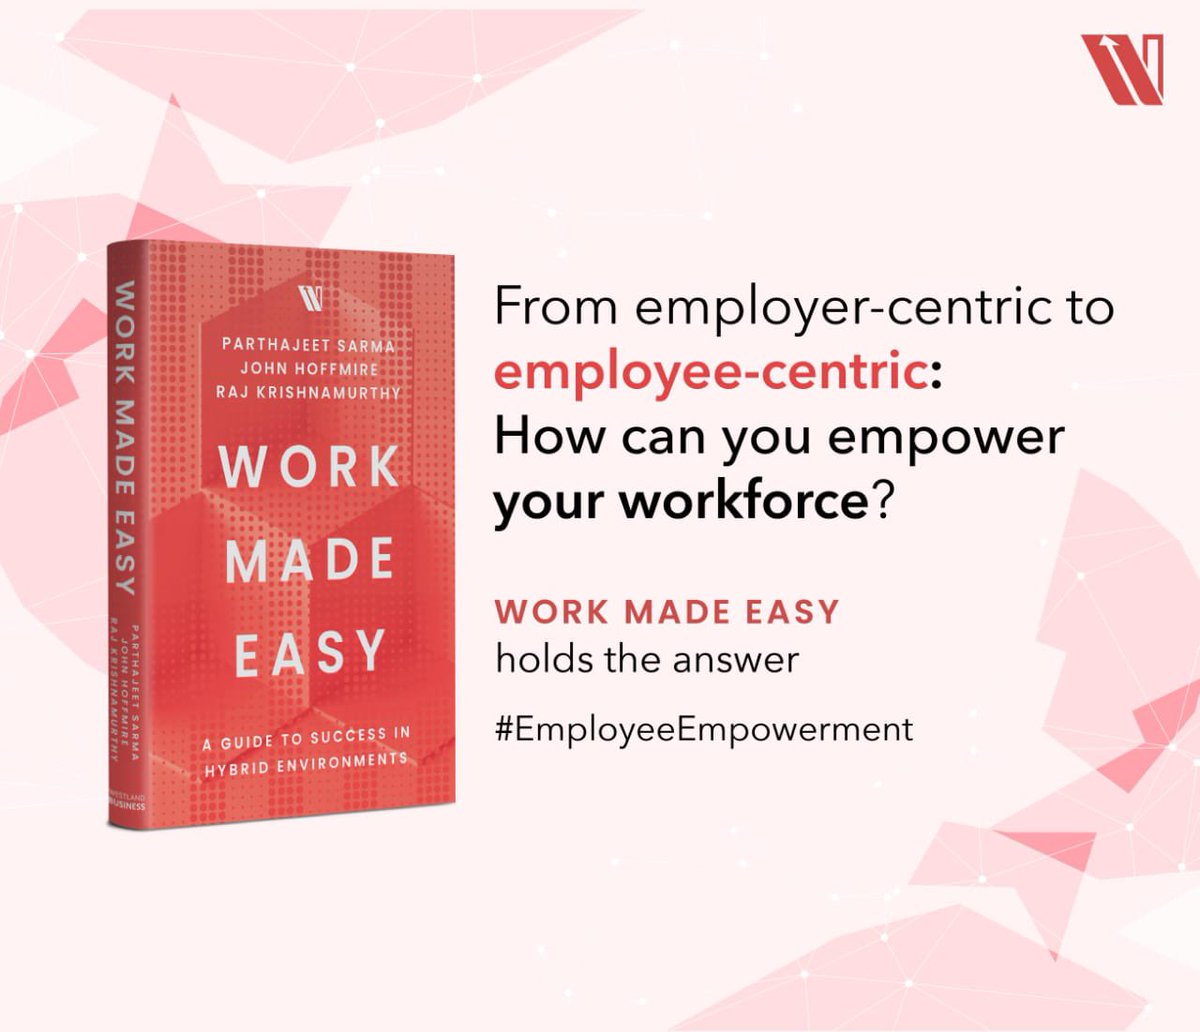 #WorkMadeEasy on Monday! Read the book for actionable steps you can take to transform your workplace into a more relatable environment for #boomers , #Millennials and #GenZ. @parthajeetsarma